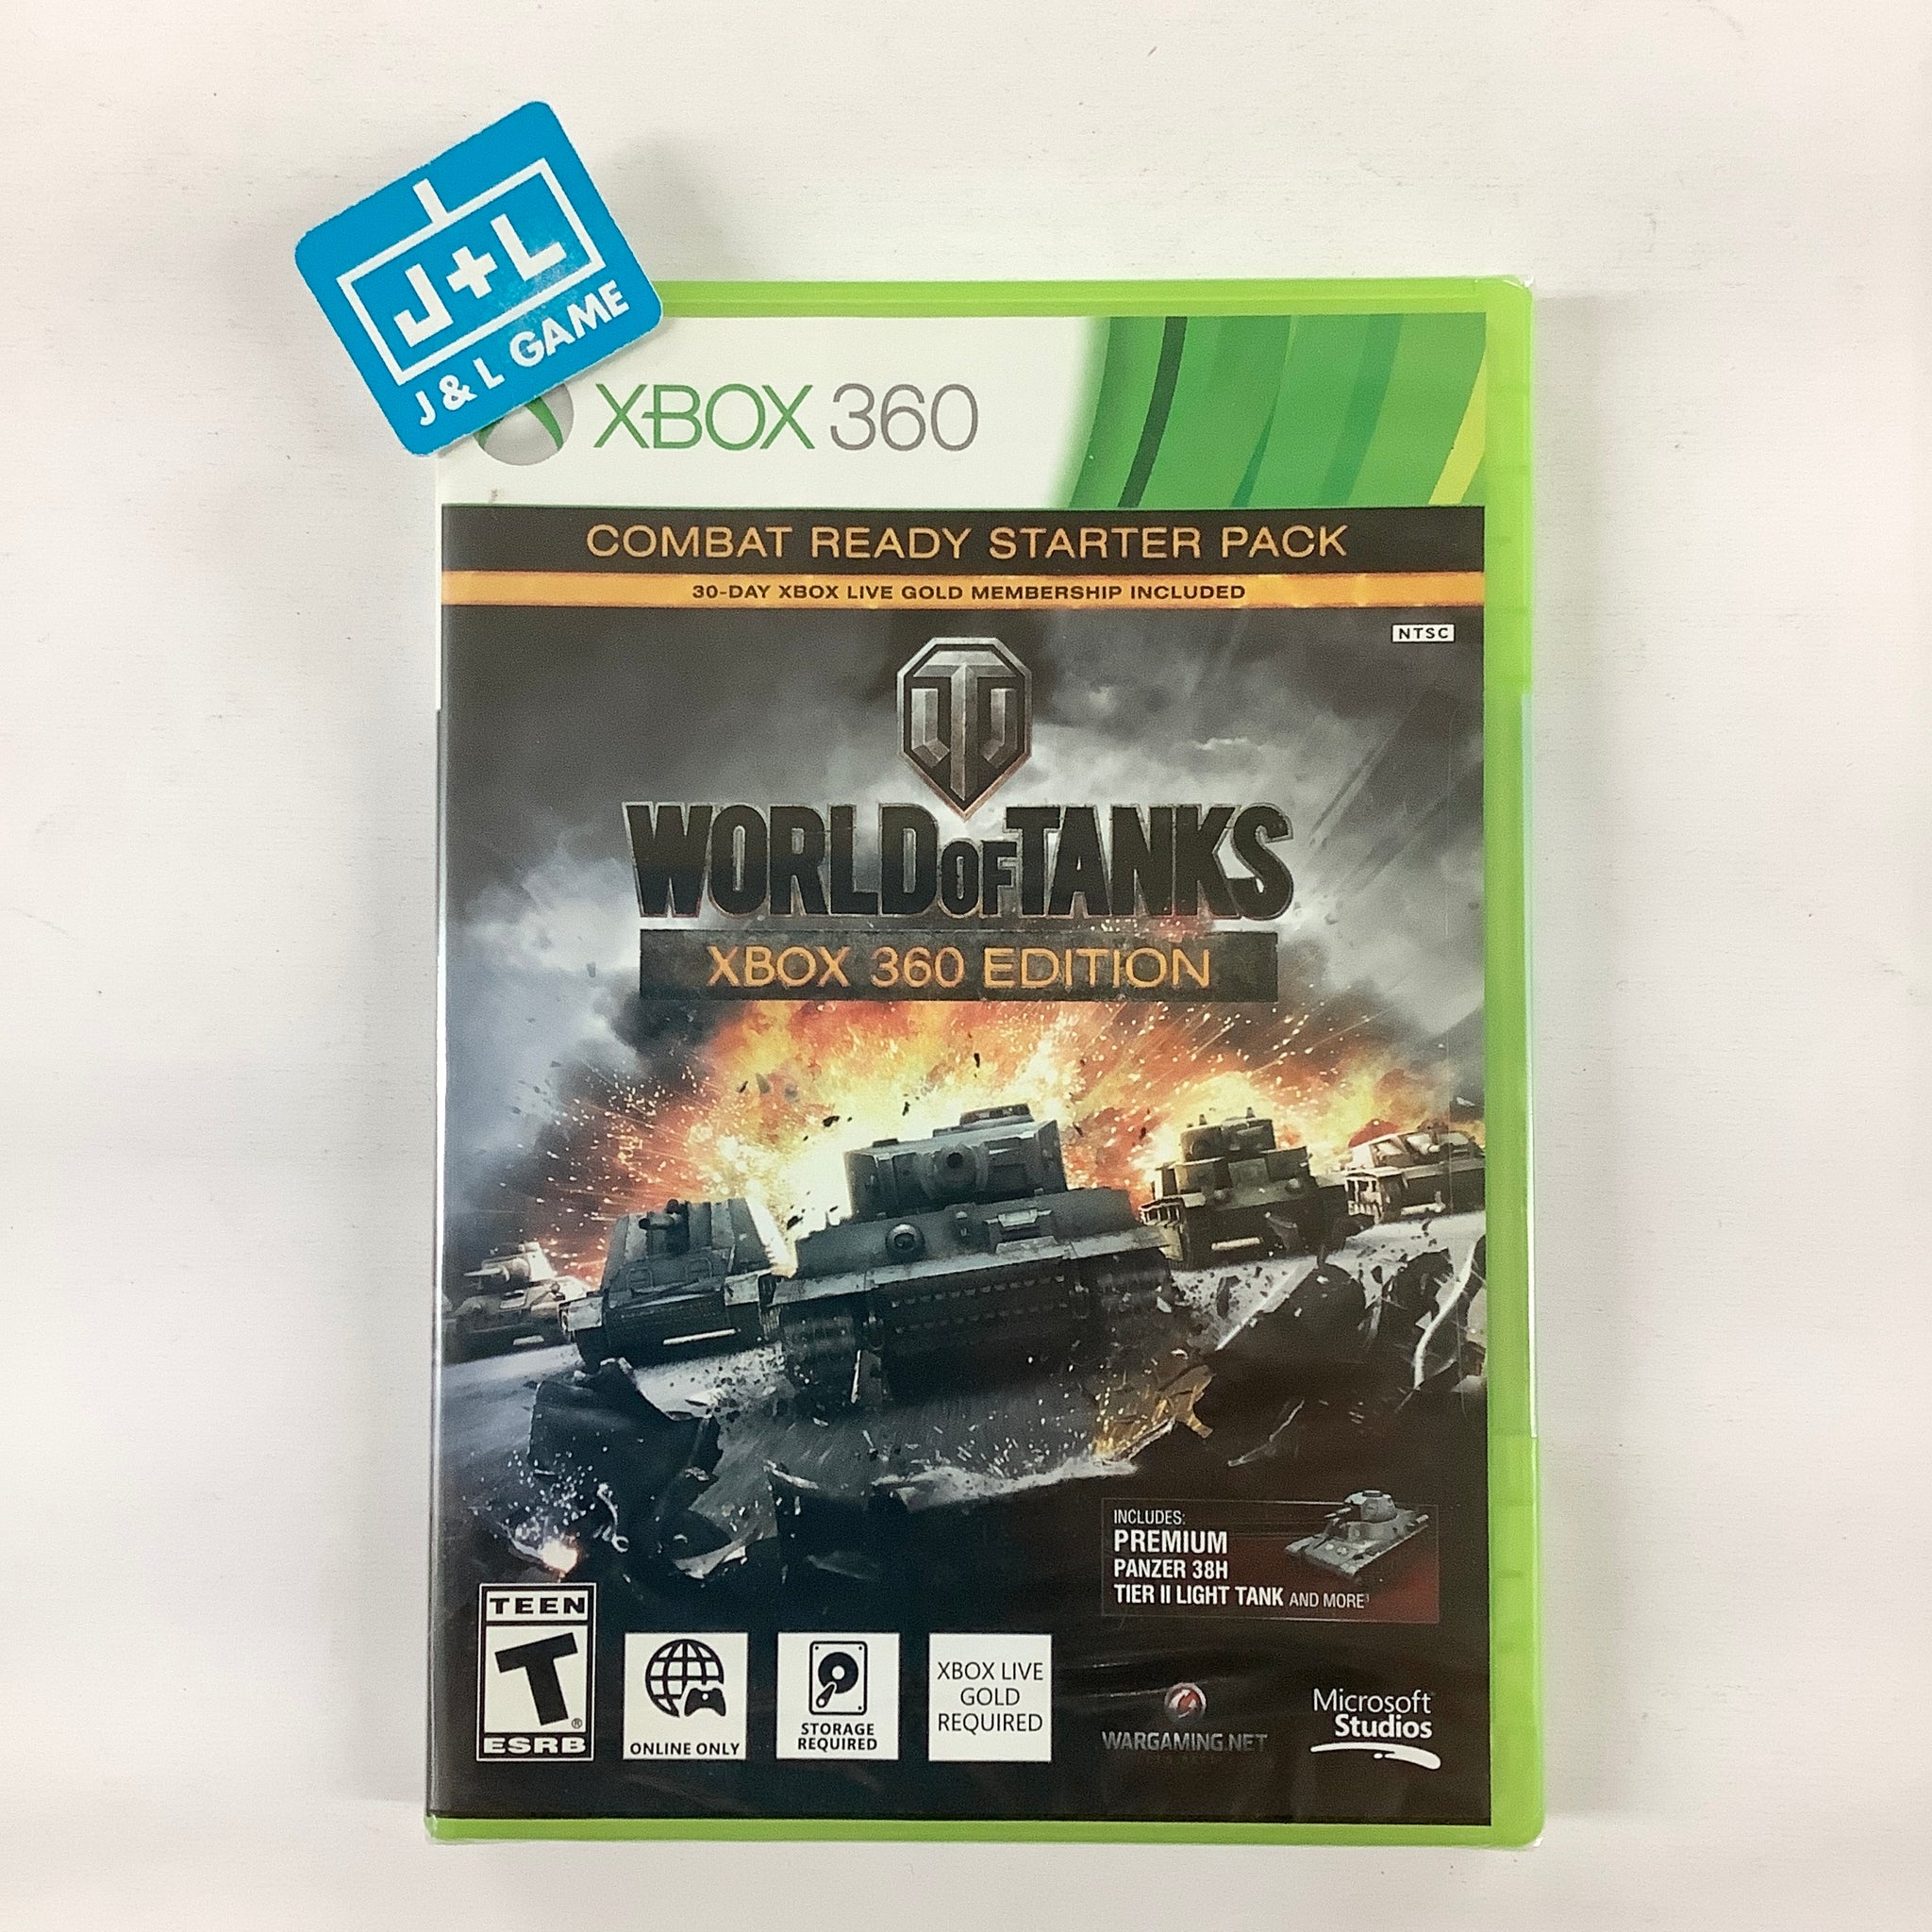 World of Tanks: Xbox 360 Edition (Combat Ready Starter Pack) - Xbox 360 Video Games Microsoft Game Studios   